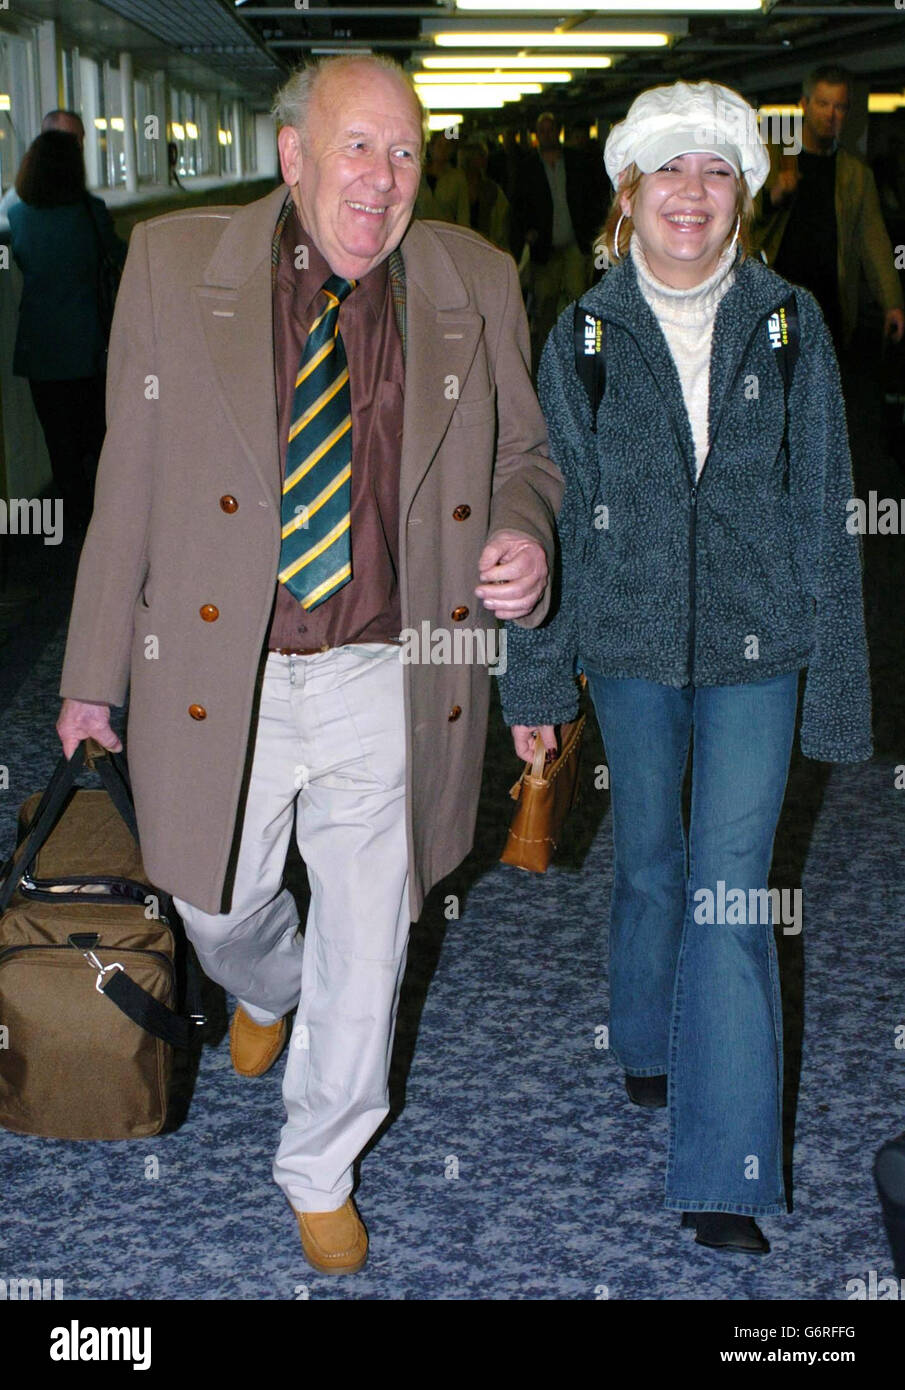 Samantha Marson, a student who jokingly claimed she was carrying a bomb in her bag as she prepared to board a flight in the US, is accompanied by her father Jim as she arrives back at Heathrow Airport. The 21-year-old was able to secure her freedom by agreeing to pay 550 to a fund for the victims of the September 11 terrorist atrocities and writing a letter of apology. Stock Photo